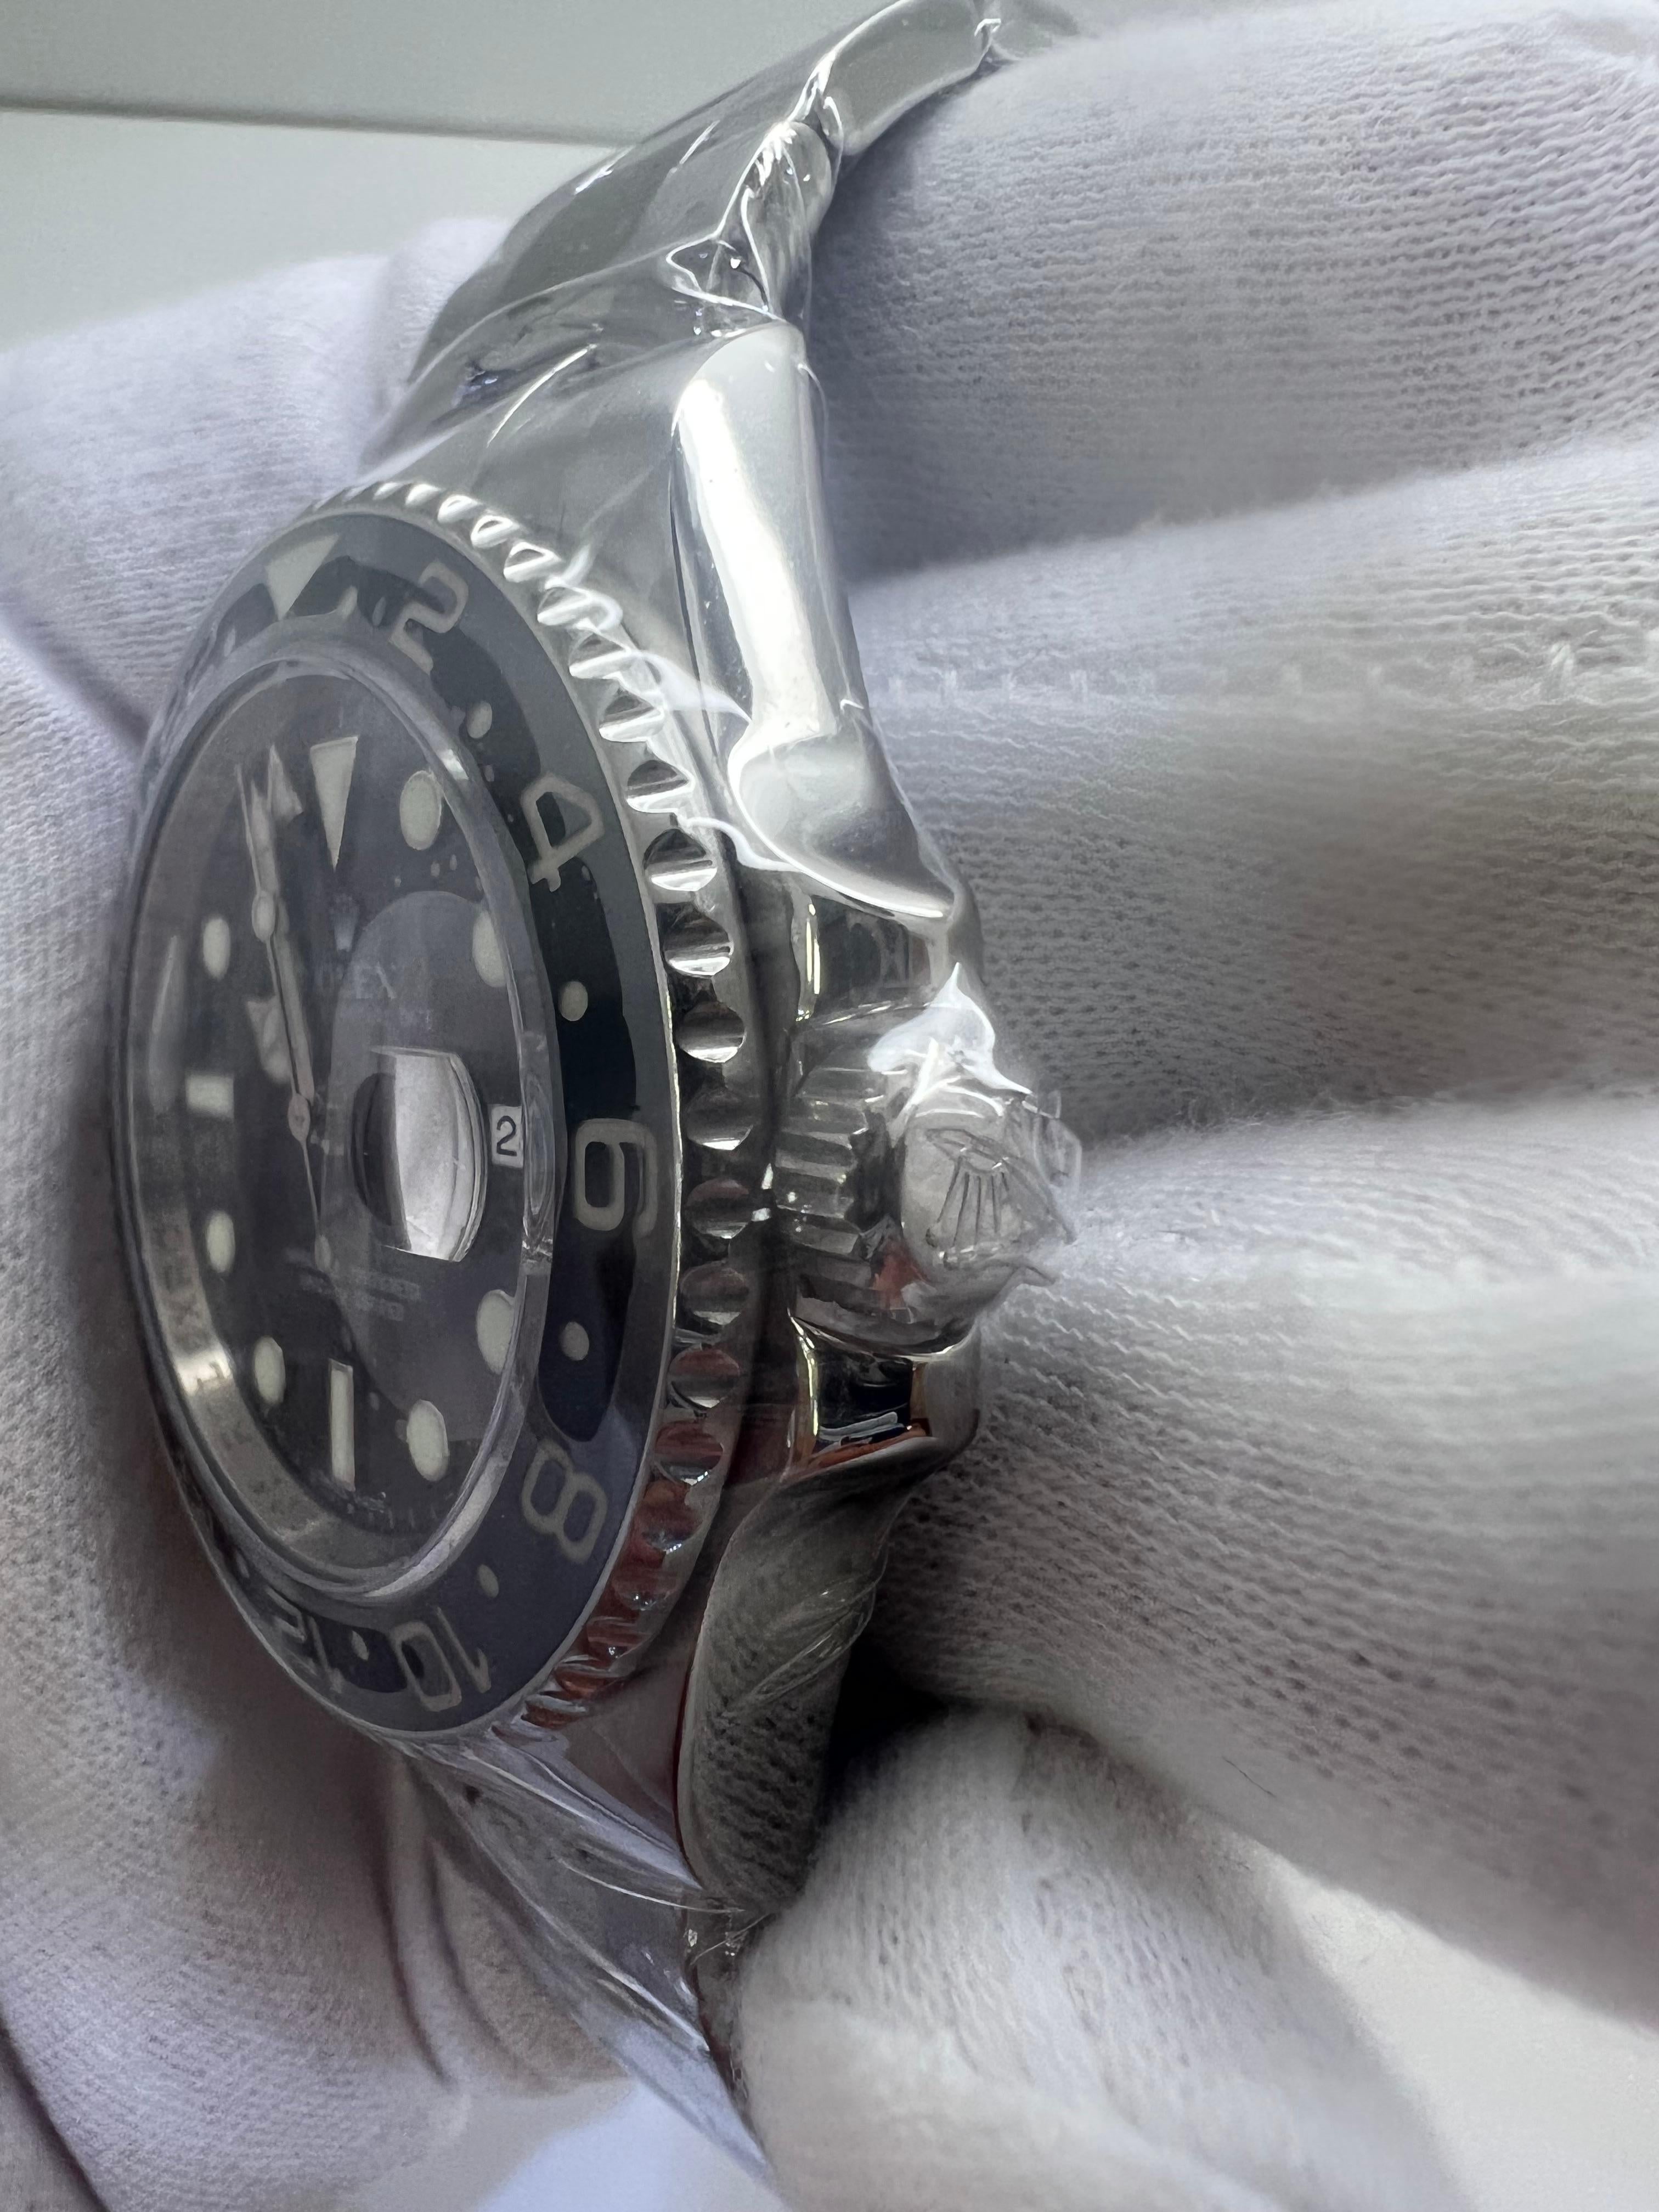 ROLEX MENS GMT MASTER II 116710LN CERAMIC BLACK DIAL STAINLESS STEEL 40MM WATCH

all original parts!

comes with original rolex box and booklets

excellent condition

year: 2009

shop with confidence

evita Diamonds